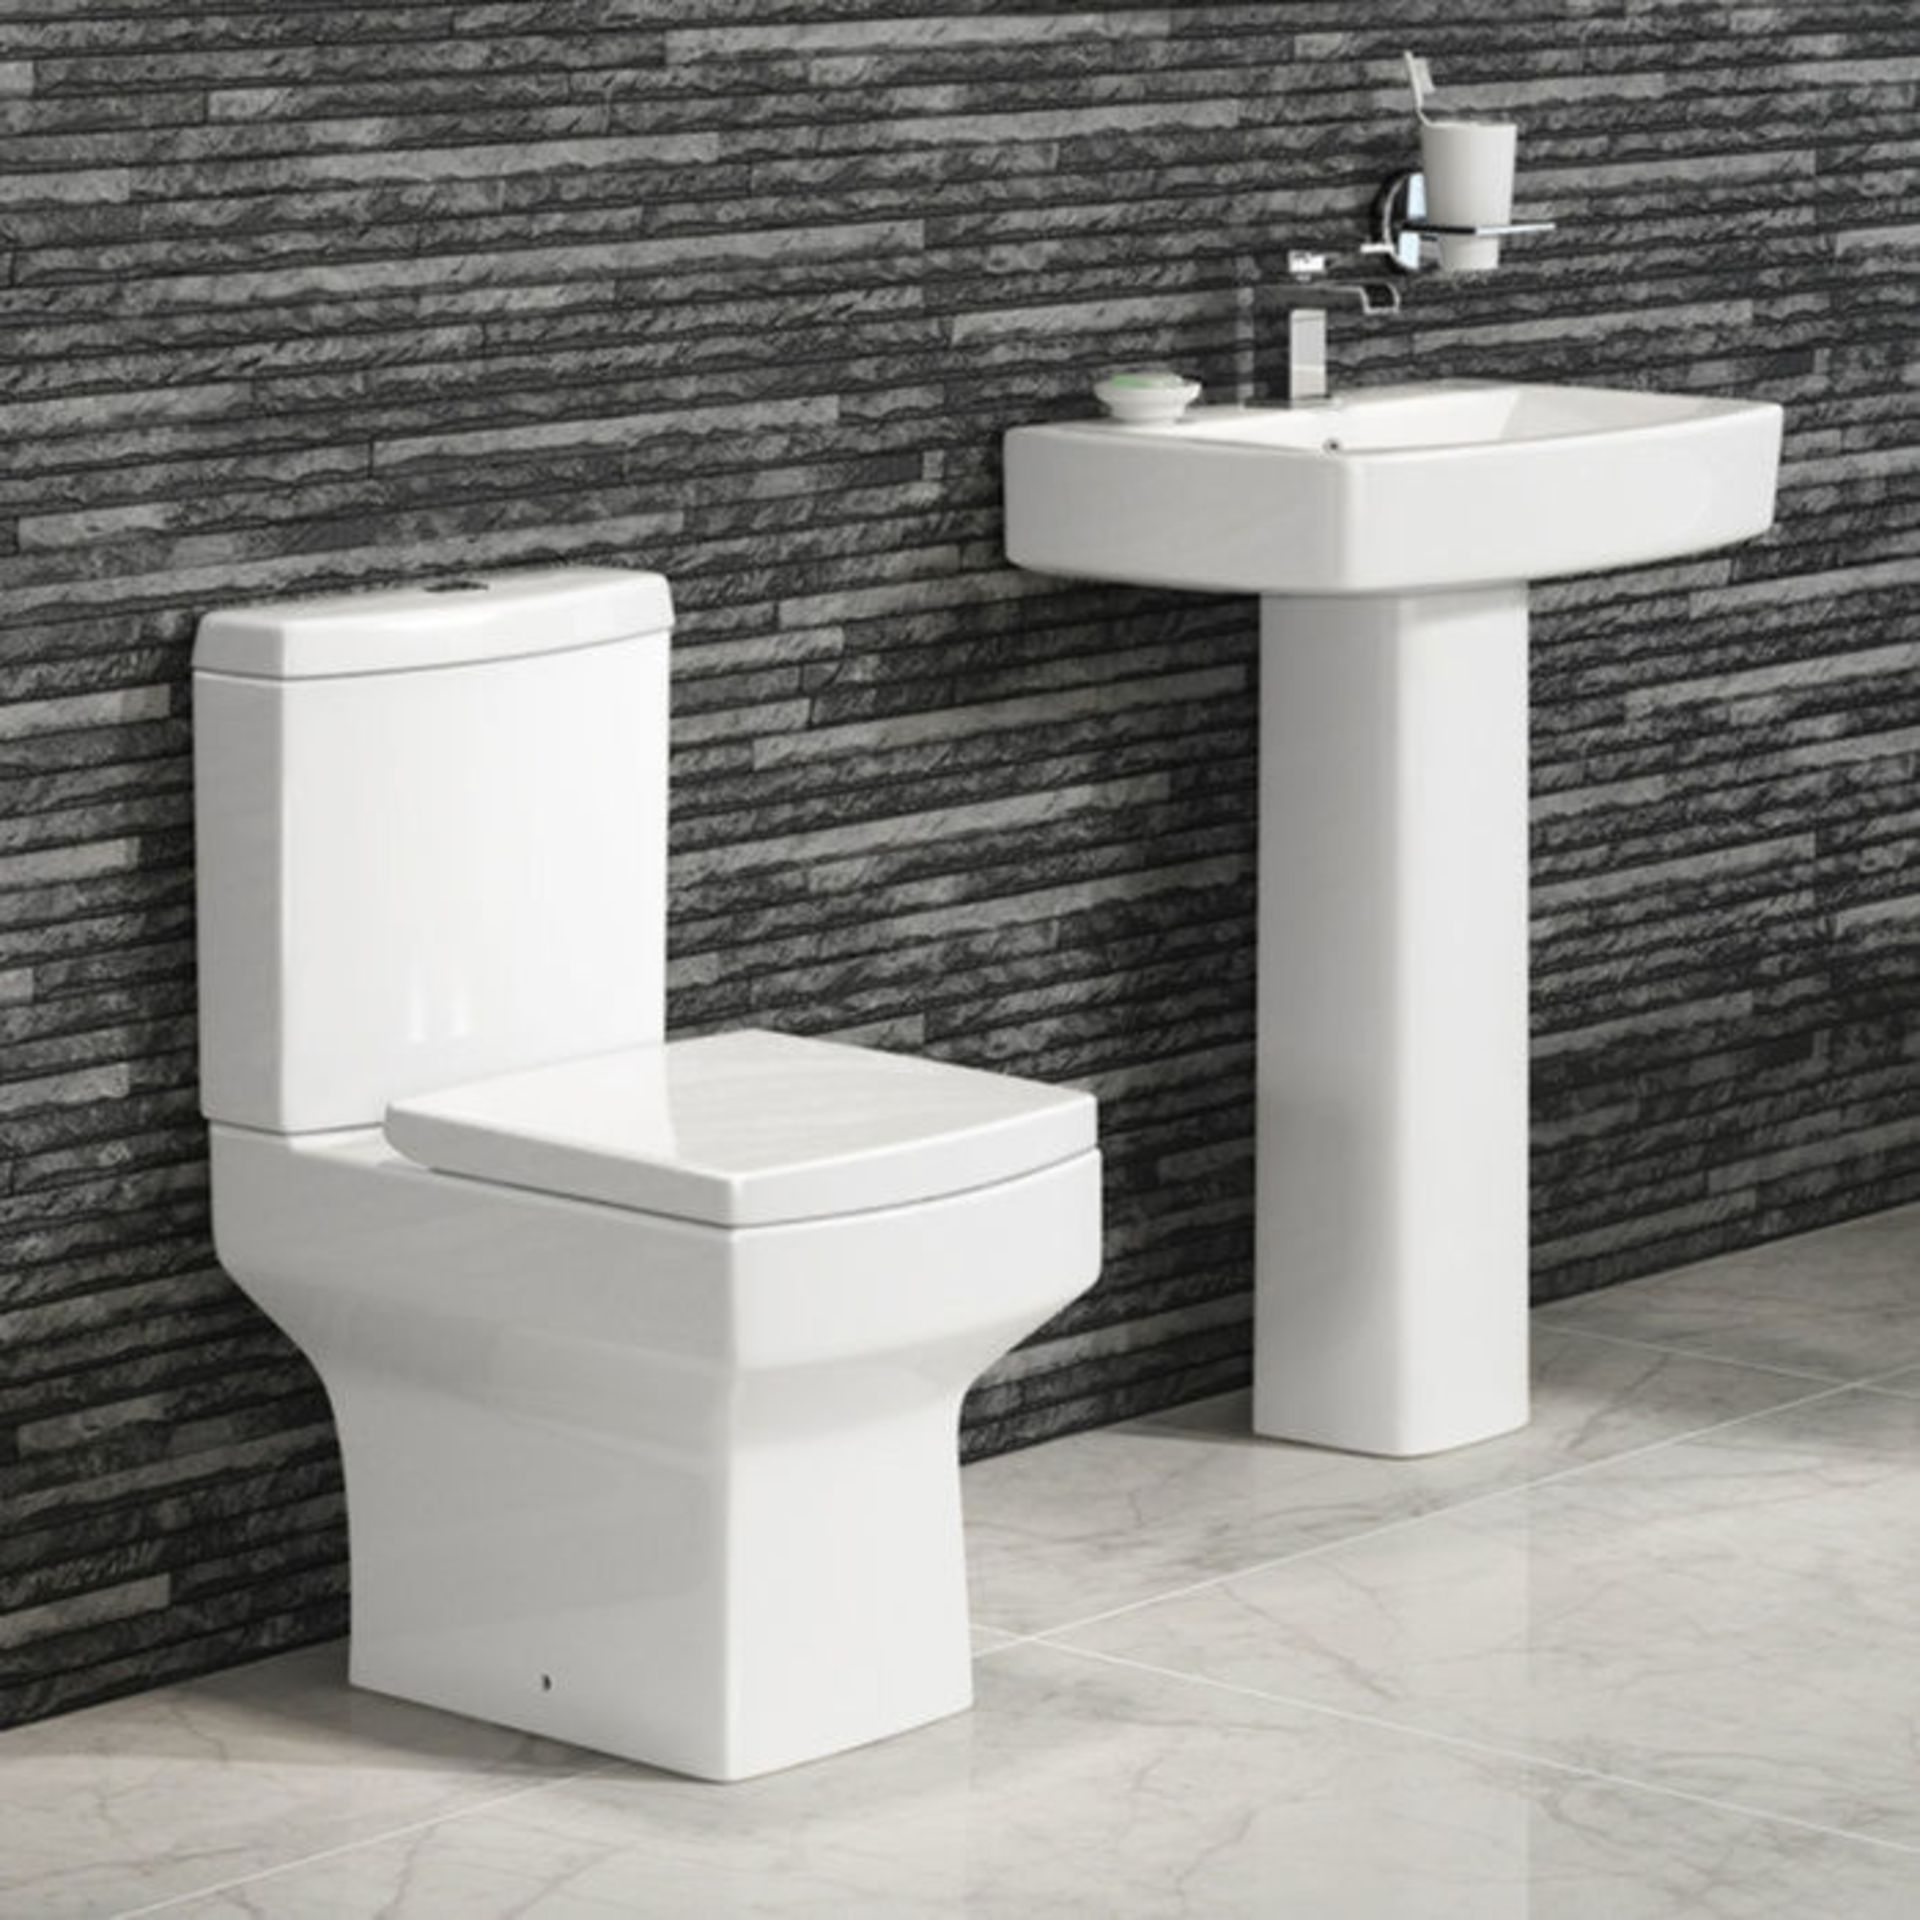 (OS101) Belfort Close Coupled Toilet & Cistern inc Soft Close Seat. Made from White Vitreous China - Image 3 of 3